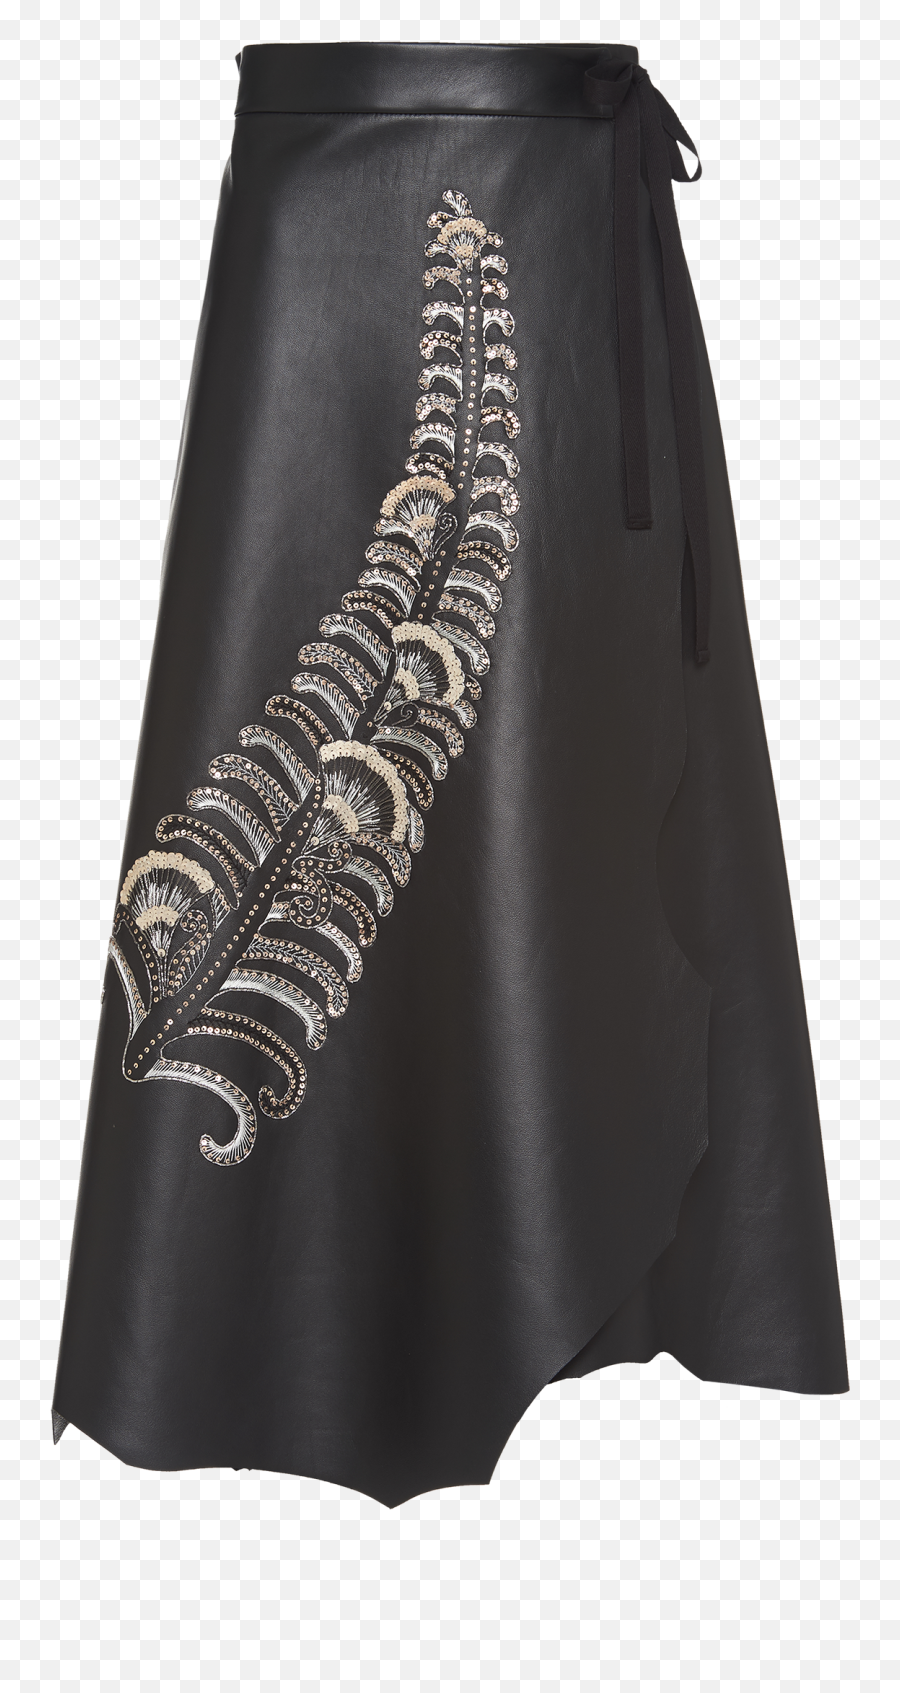 Nappa Leather Skirt With Sequins Png